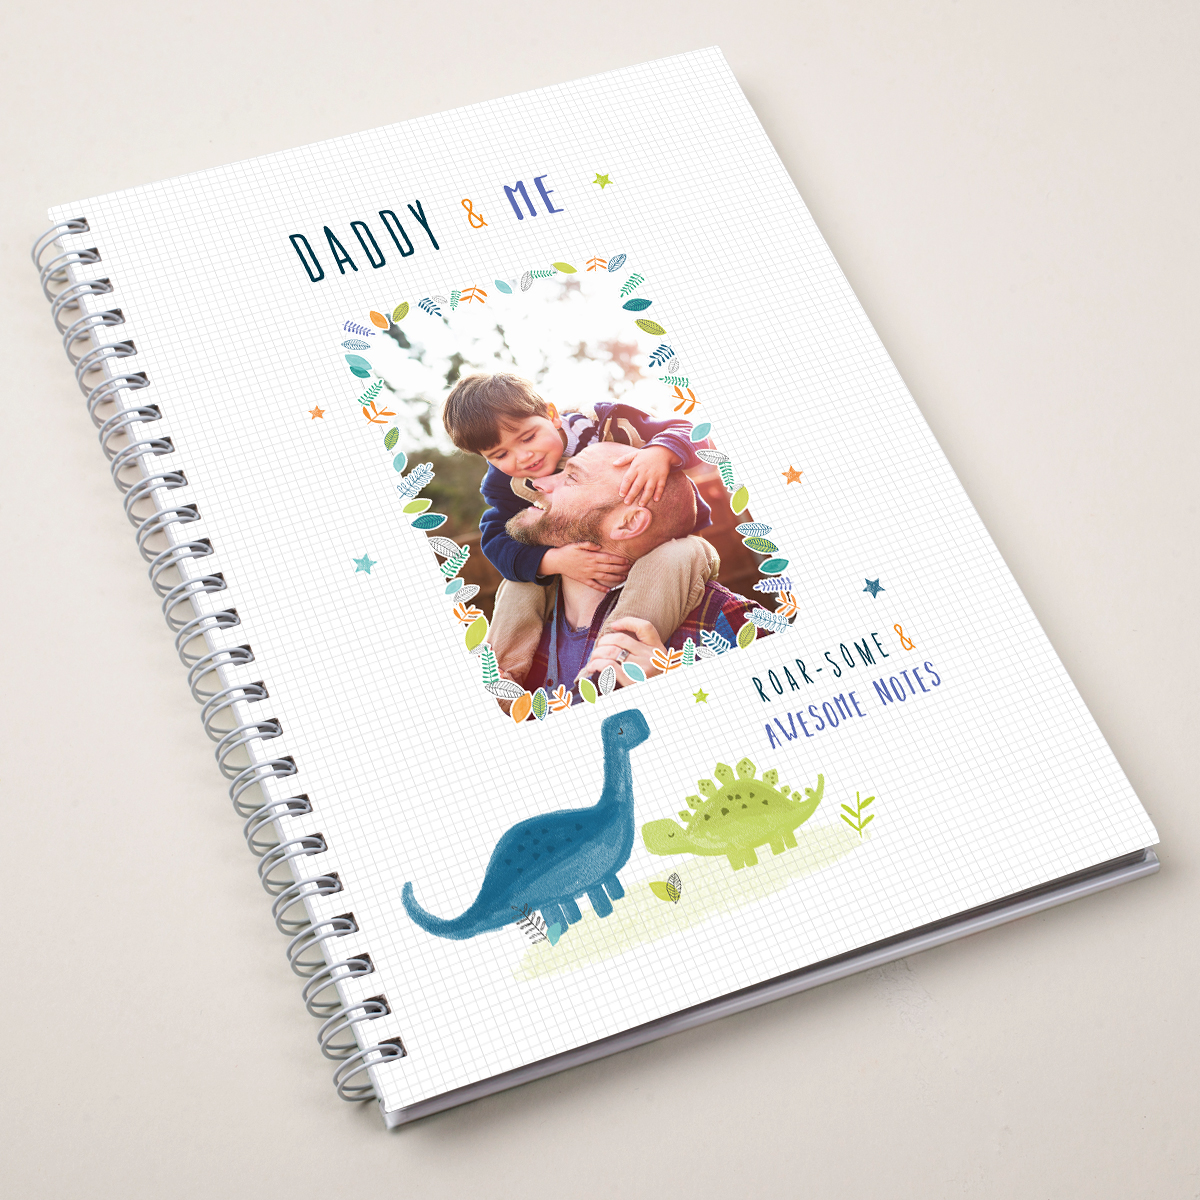 Personalised Father's Day Notebook - Daddy & Me 